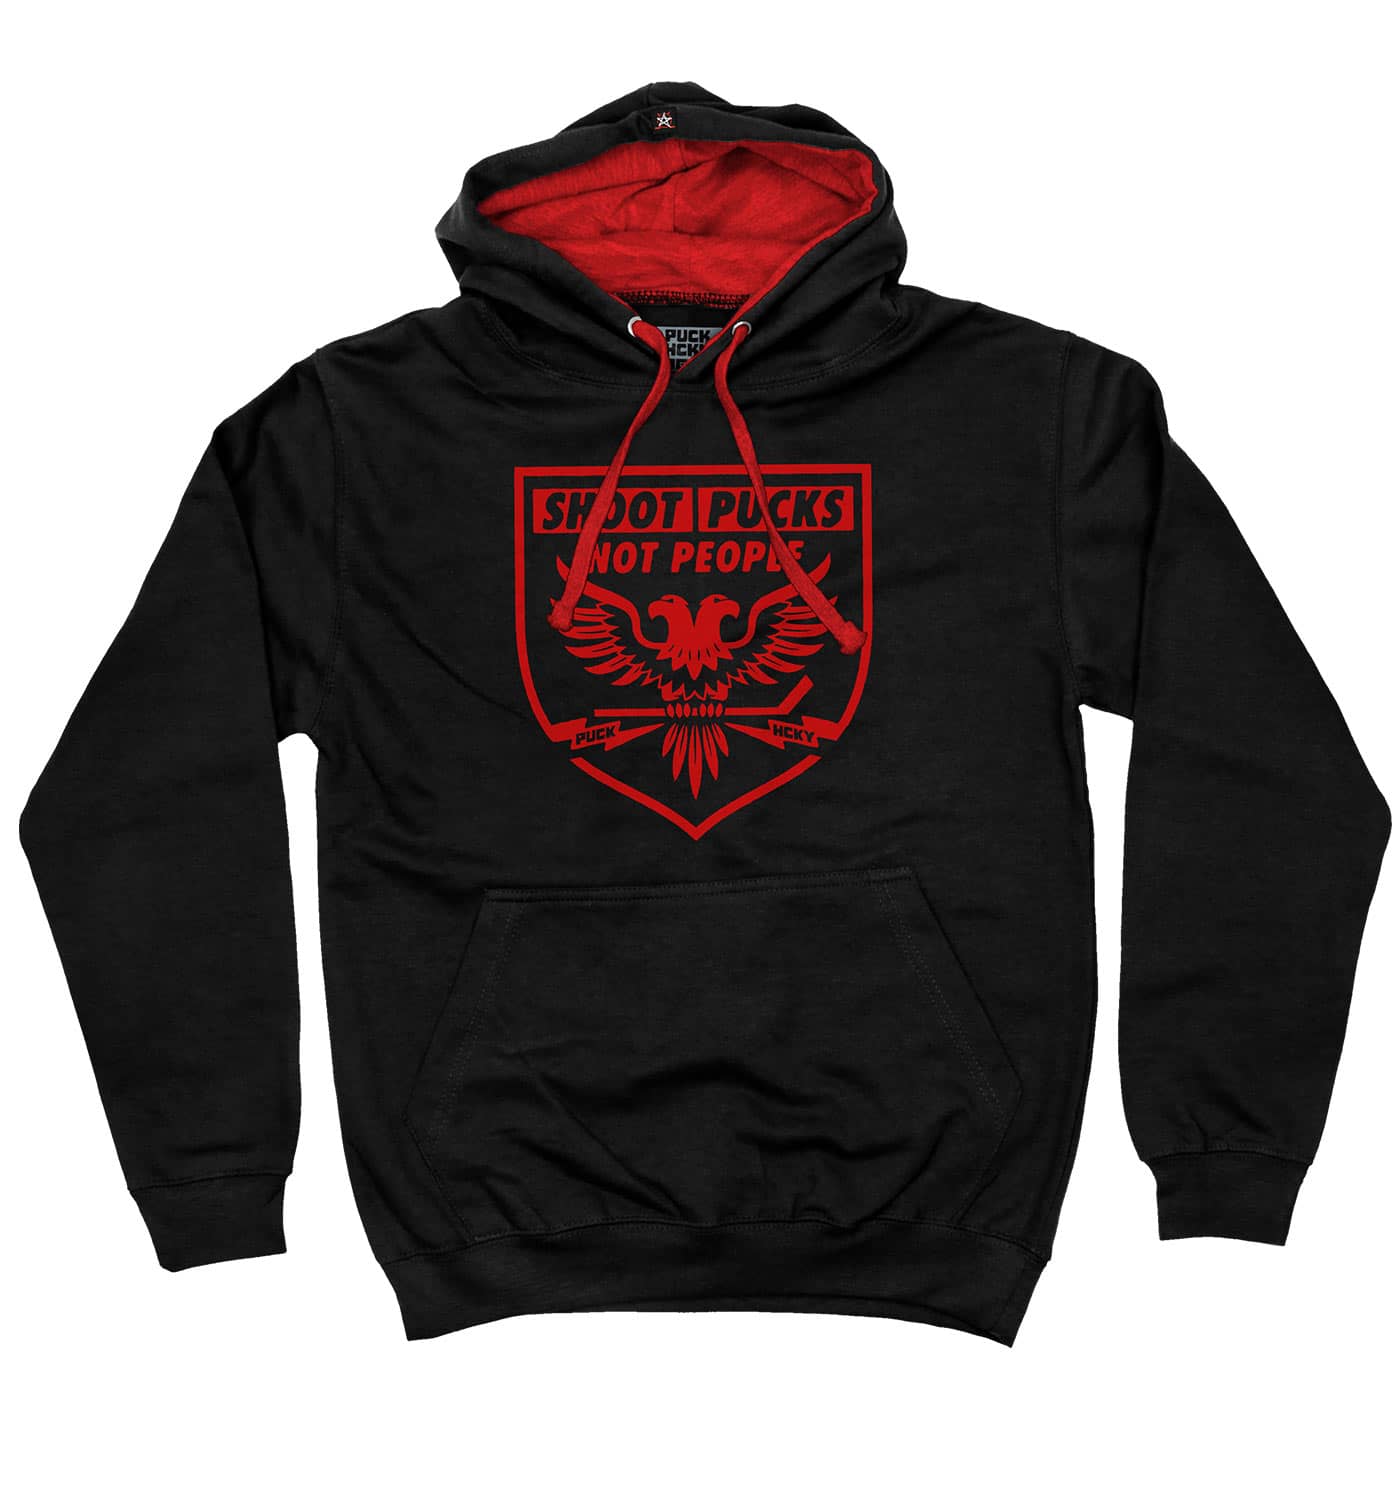 PUCK HCKY 'SHOOT PUCKS NOT PEOPLE - BATTLE EAGLE' pullover colorblock hockey hoodie in black and red